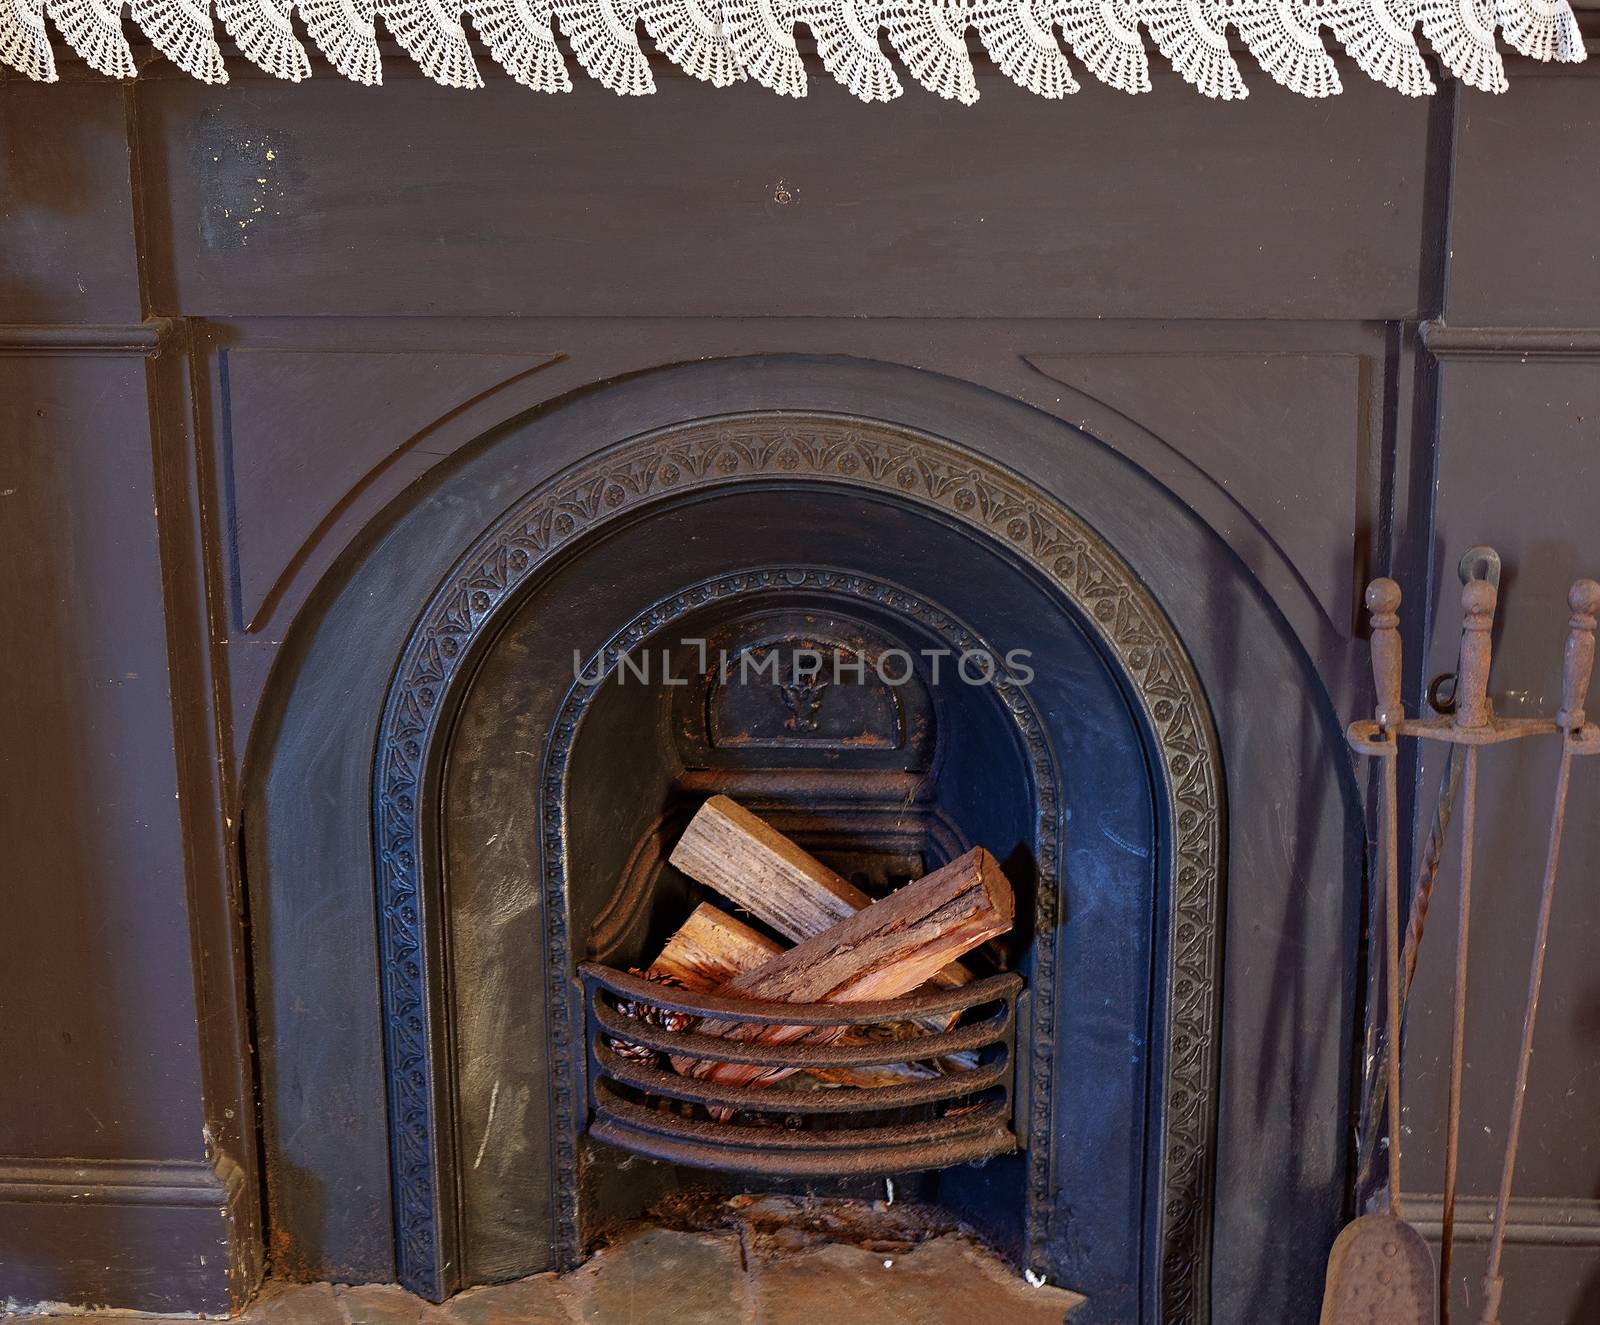 An old fashioned fireplace from 19th century Australia, complete with crochet on mantelpiece